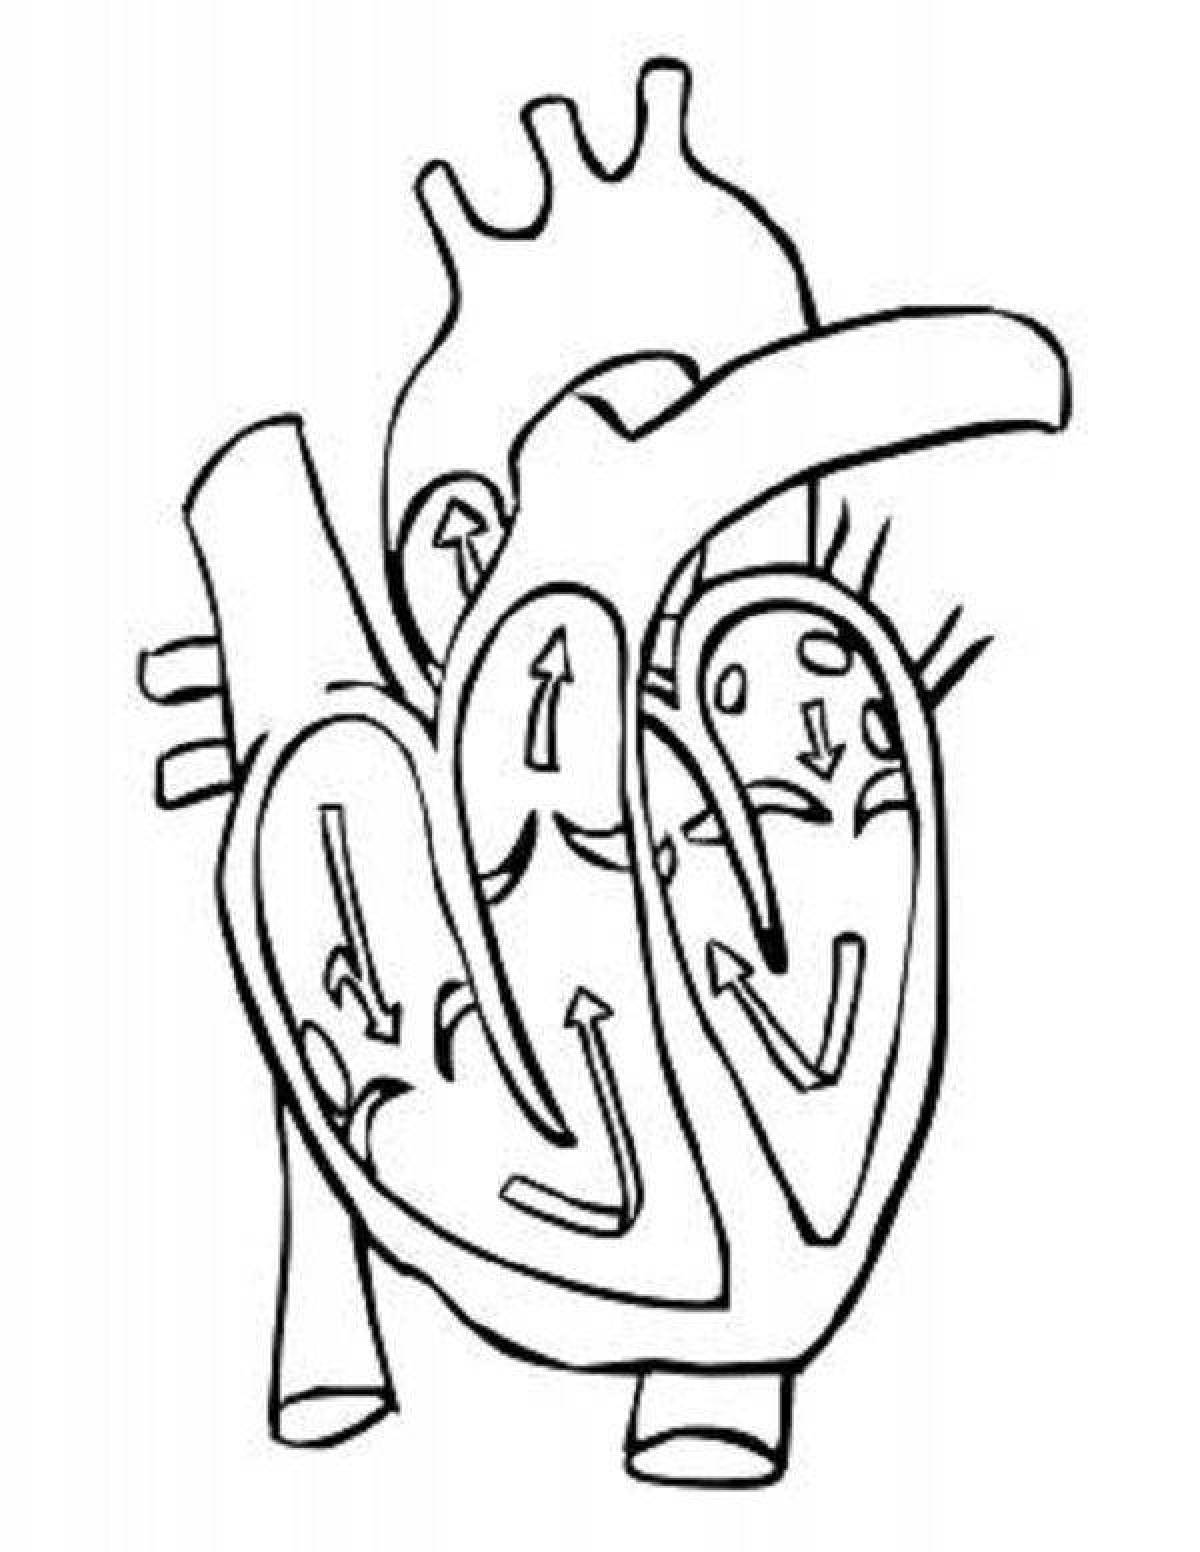 Adorable human heart coloring page